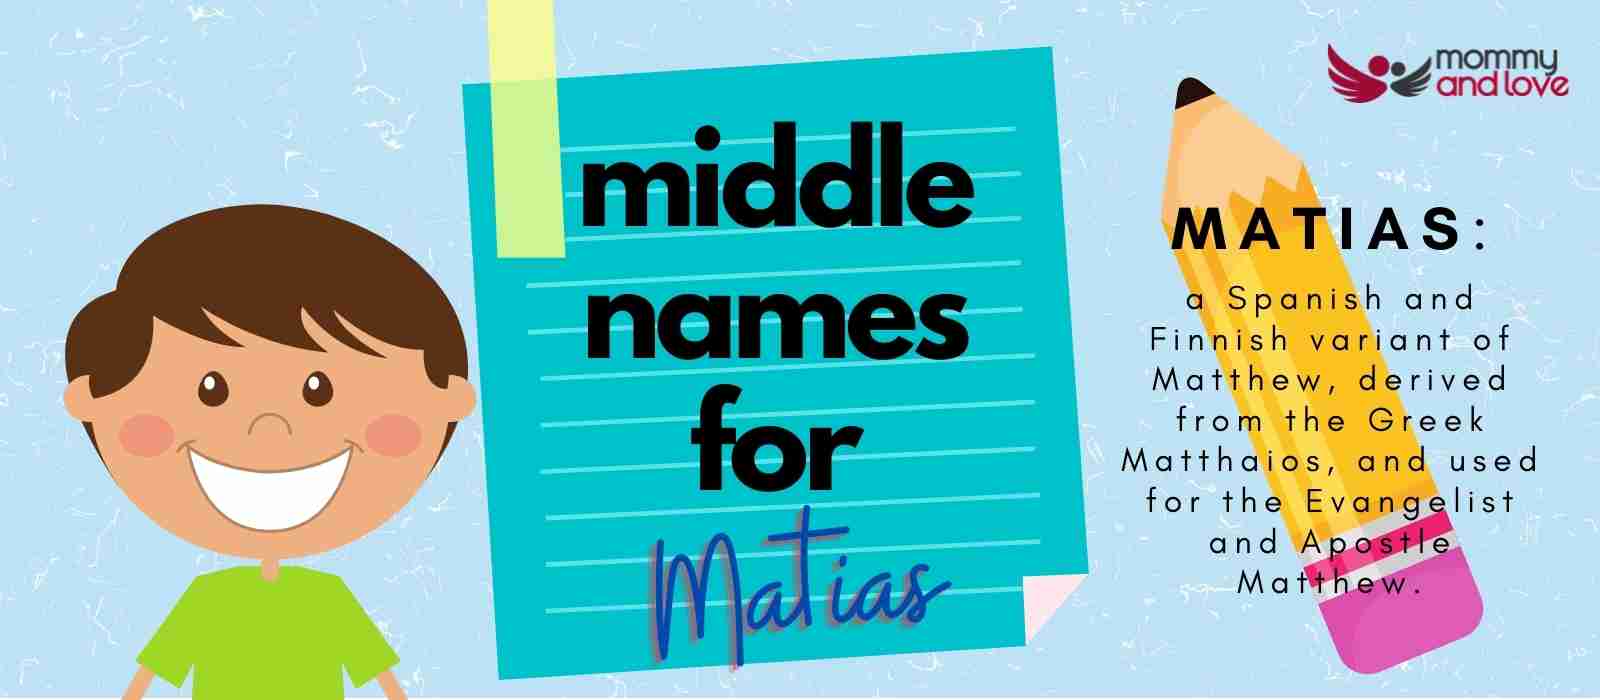 Middle Names for Matias